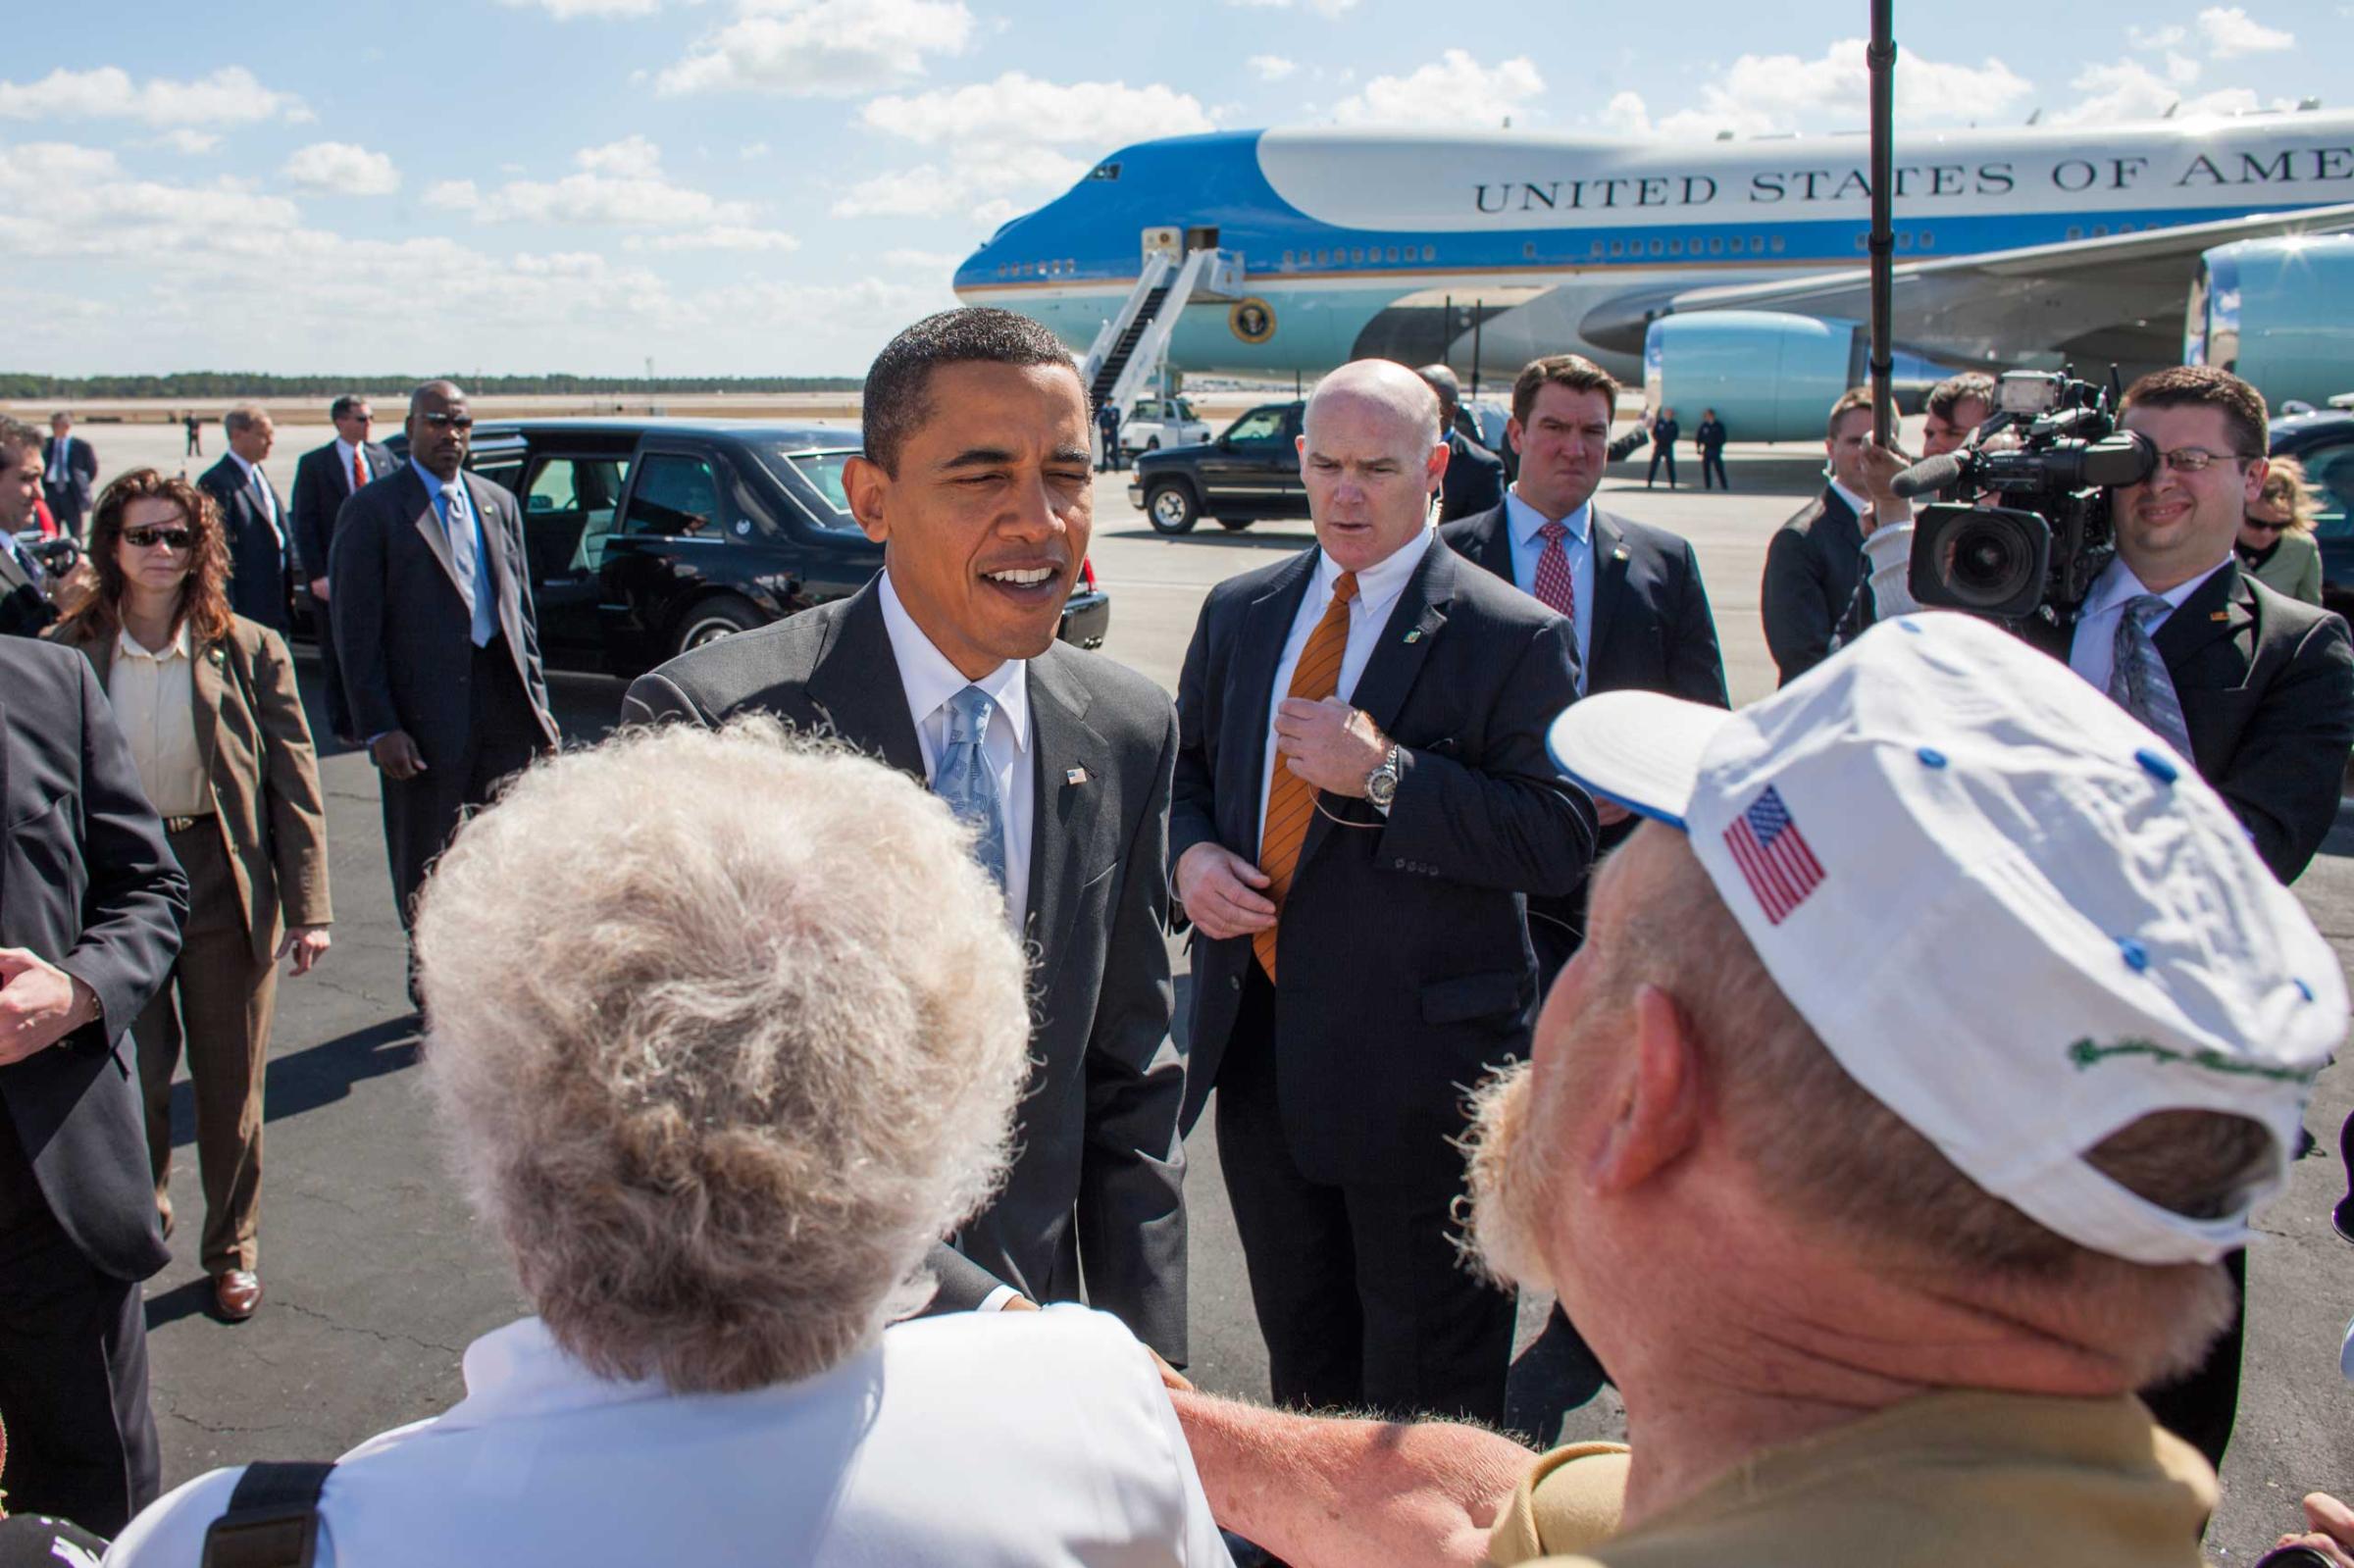 President Barack Obama greets supporters at the airport Fort Meyers, Florida.Photo by Brooks Kraft/Corbis